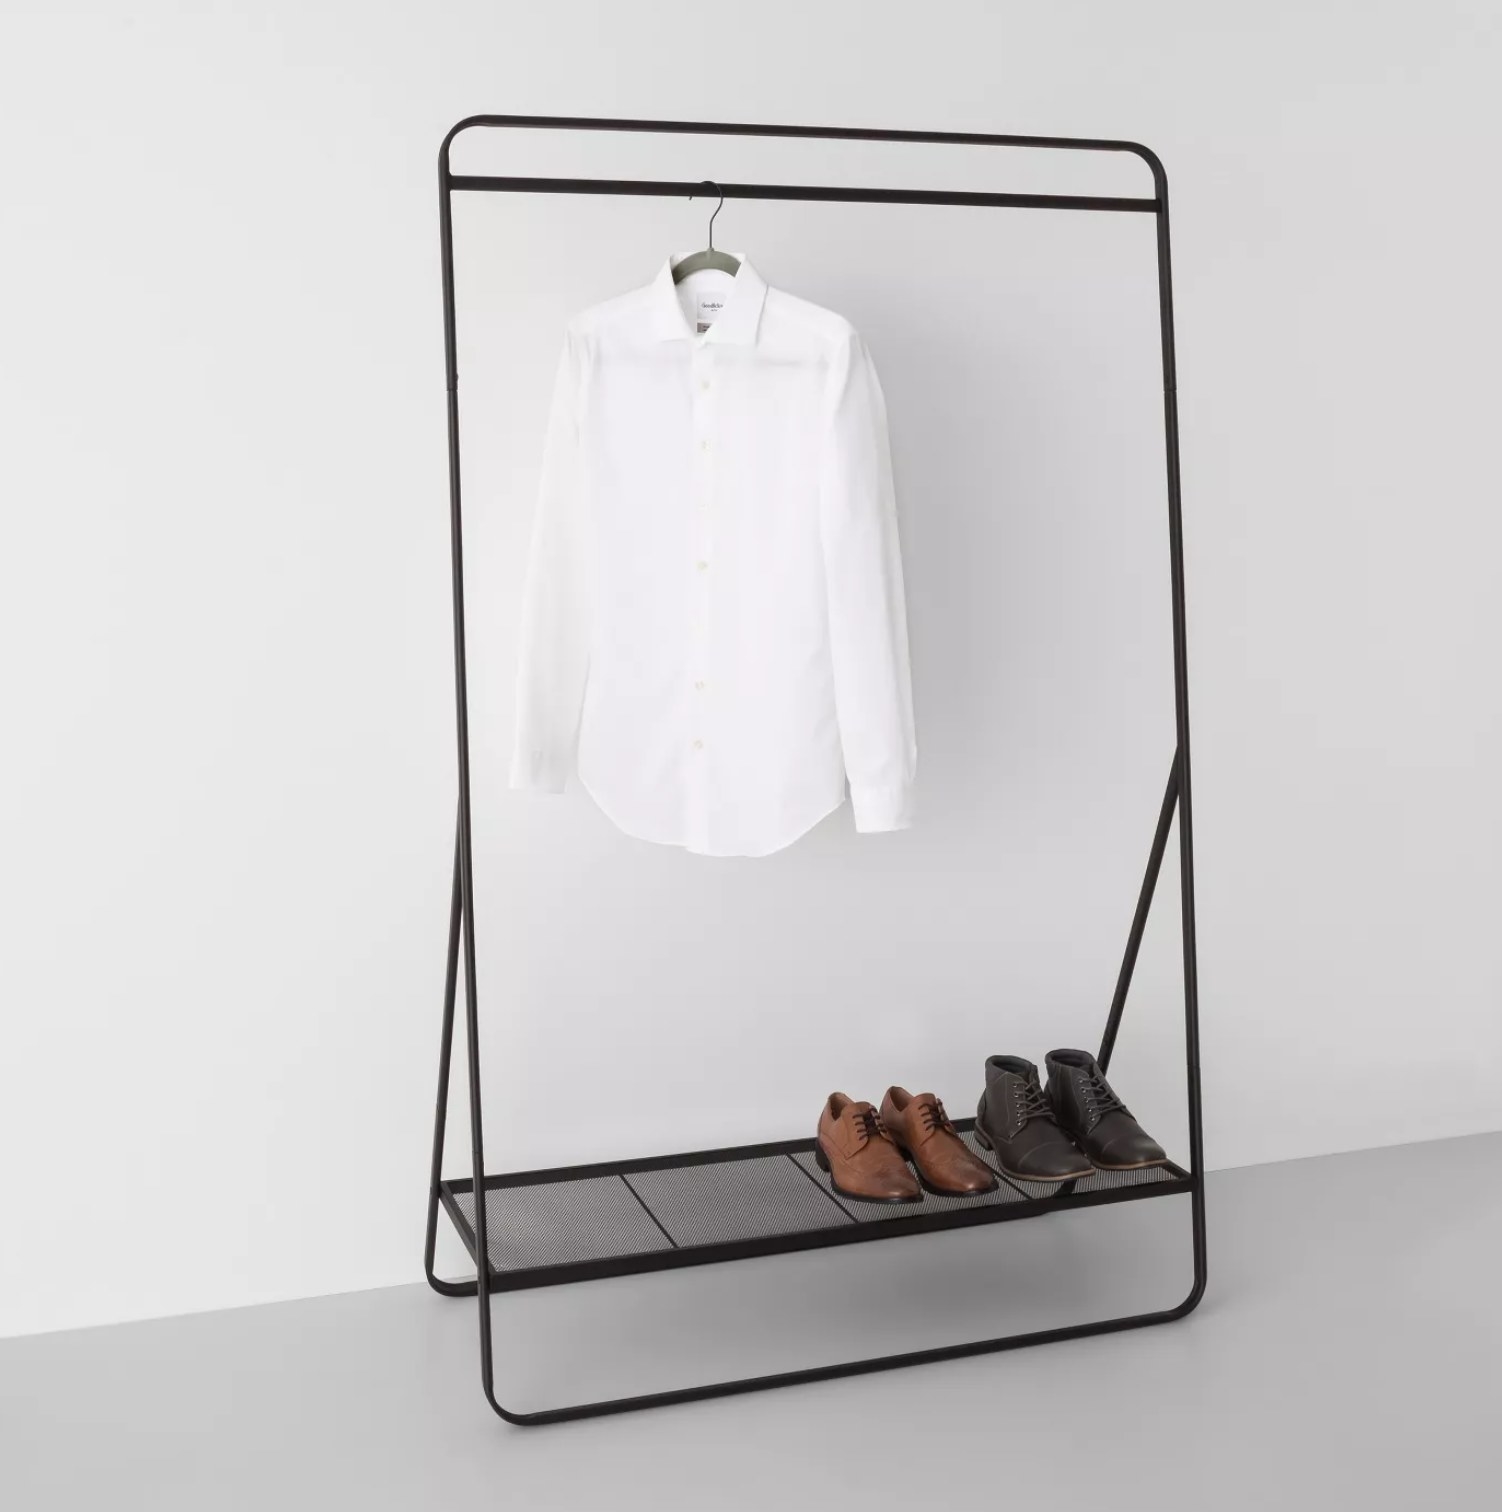 The rack with a hanging shirt and shoes on the bottom